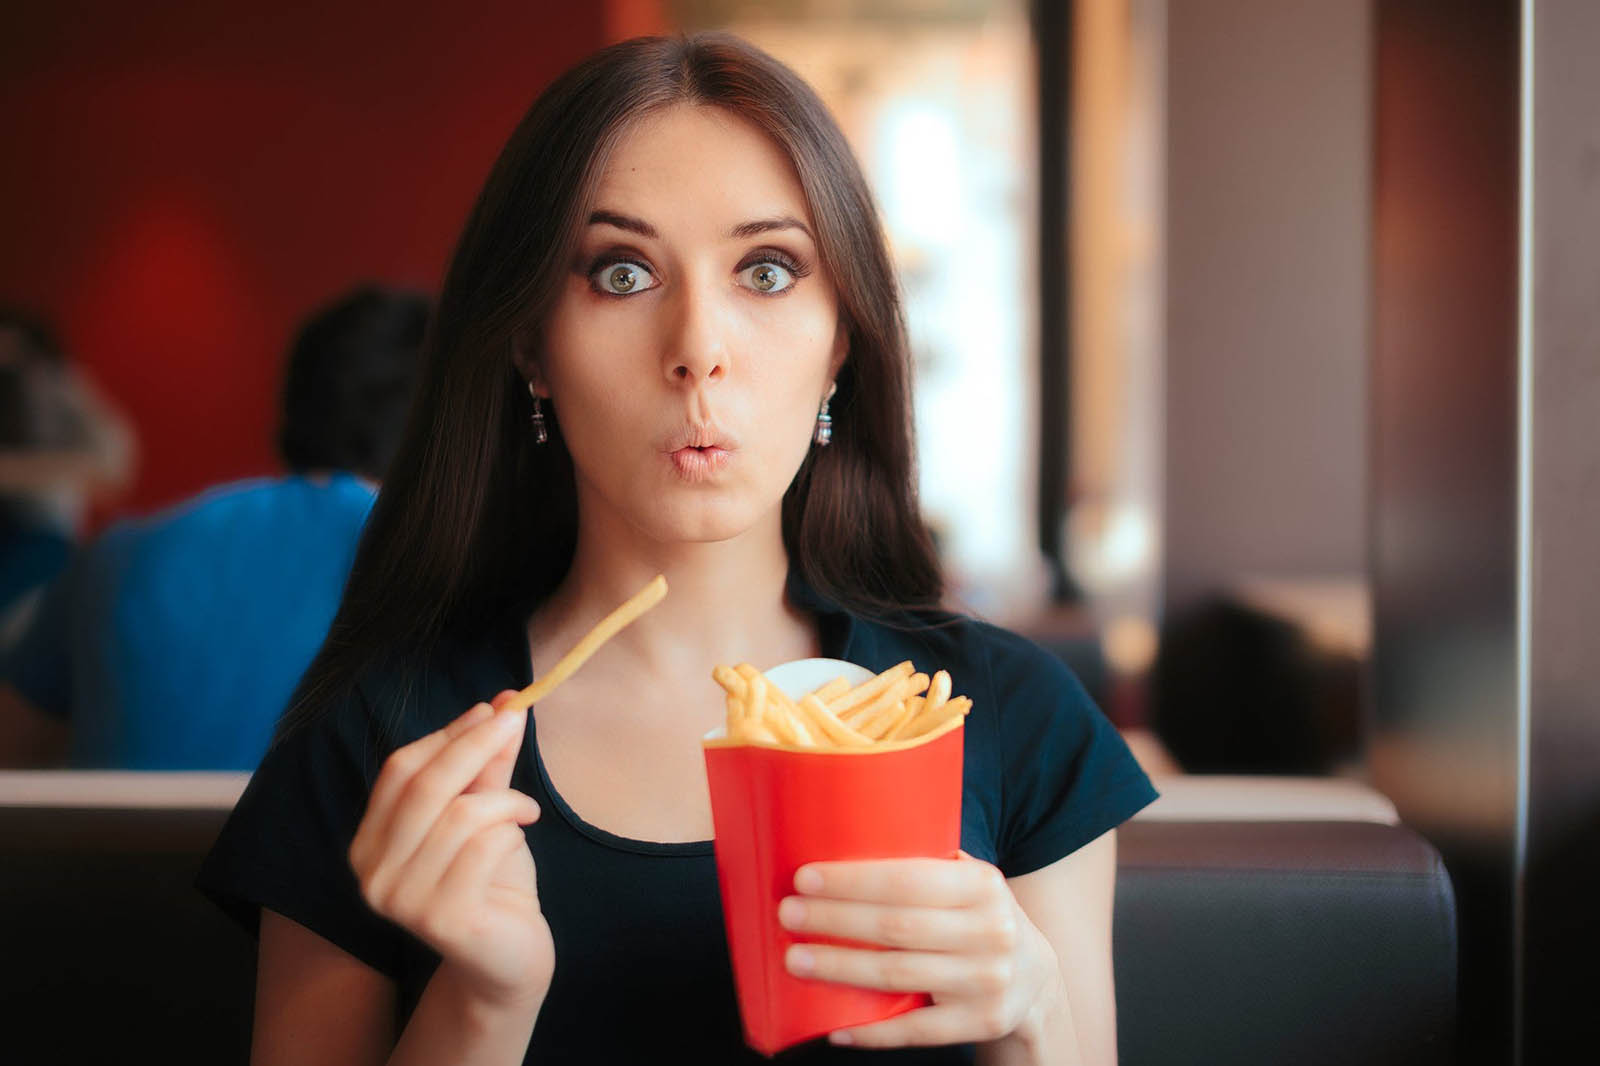 Woman Eating Mcdonald's French Fries